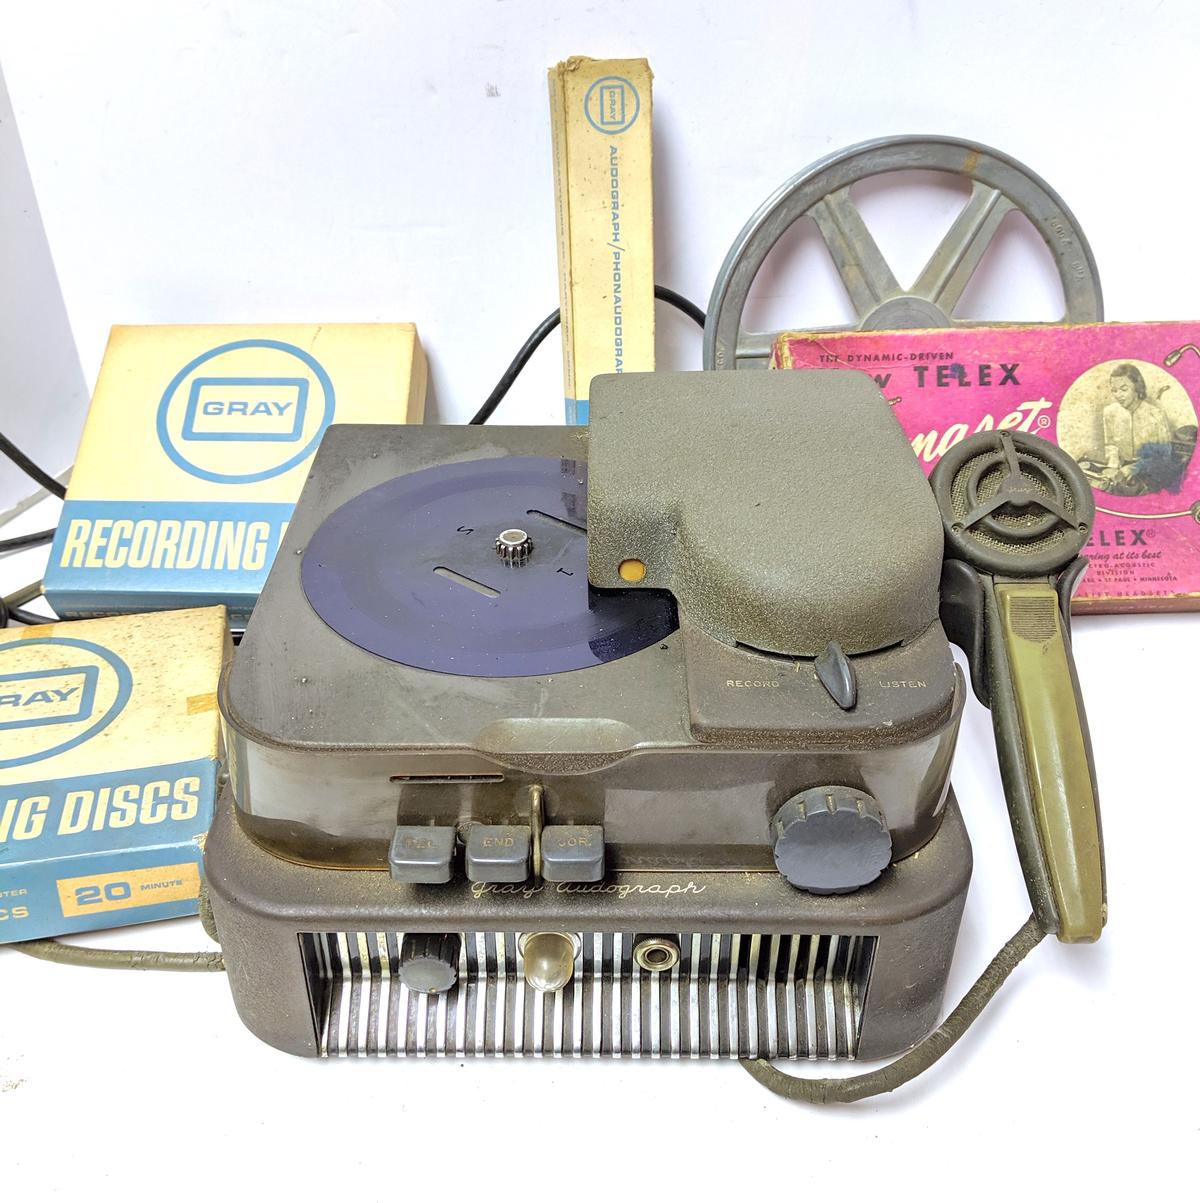 Vintage 1940's Gray Audograph Dictation Machine With Hard To Find Recording Discs & Accessories